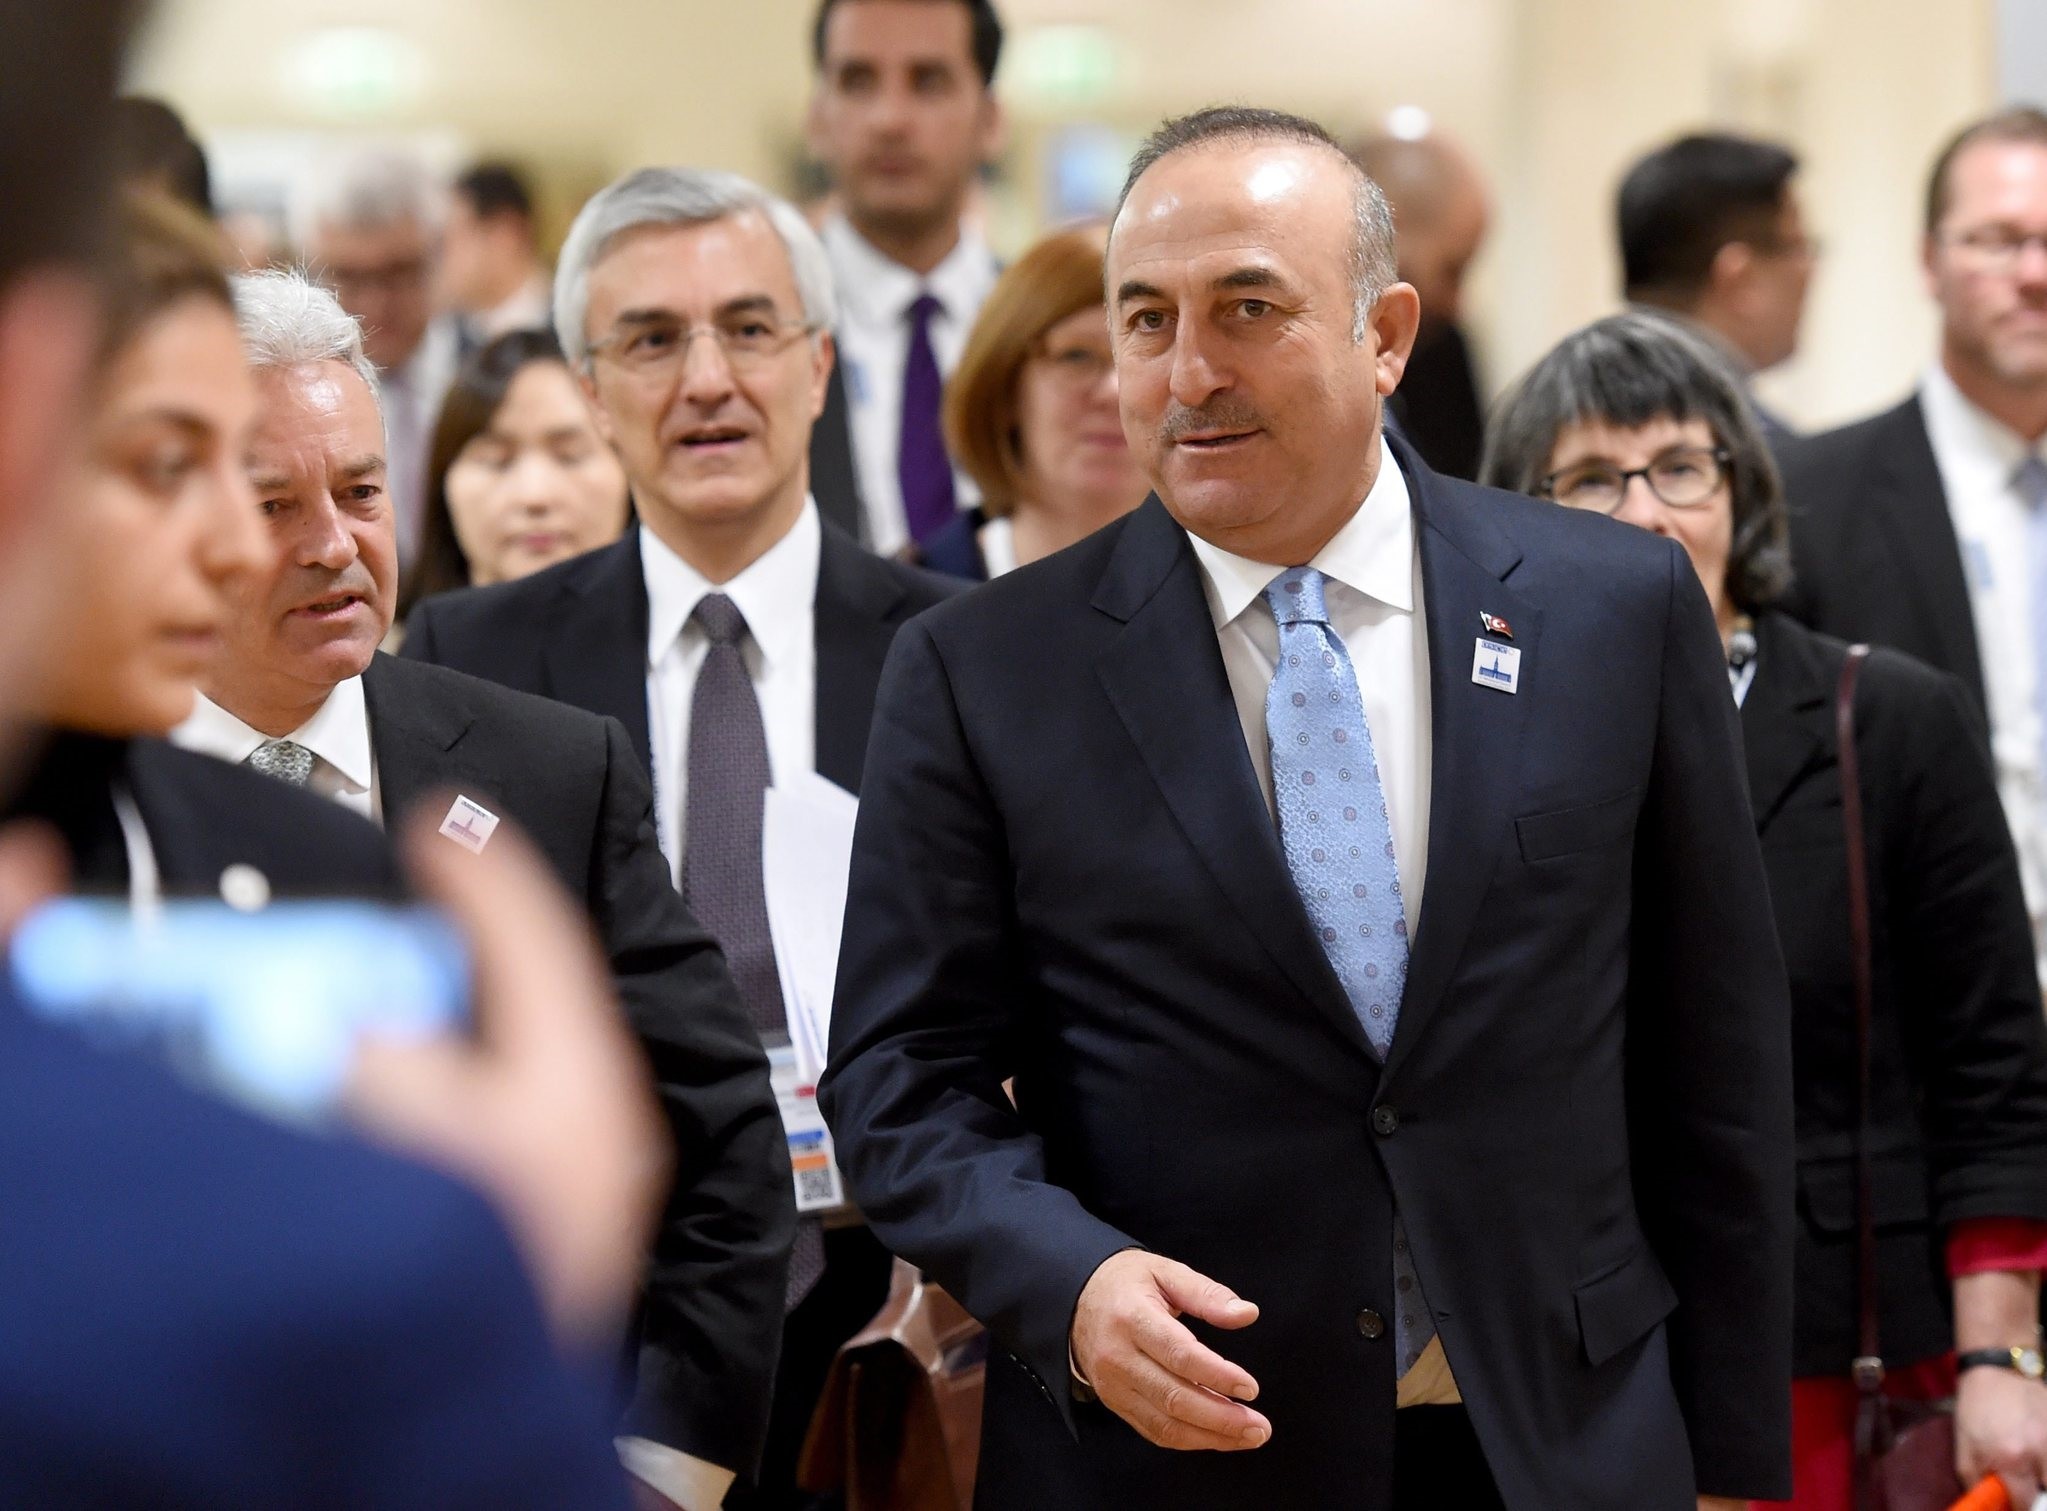 FM Mevlut Cavusoglu (C) and British Minister of State for Foreign and Commonwealth Affairs Alan Duncan (2-L) attend for the OSCE ministerial council in Hamburg. (EPA Photo)